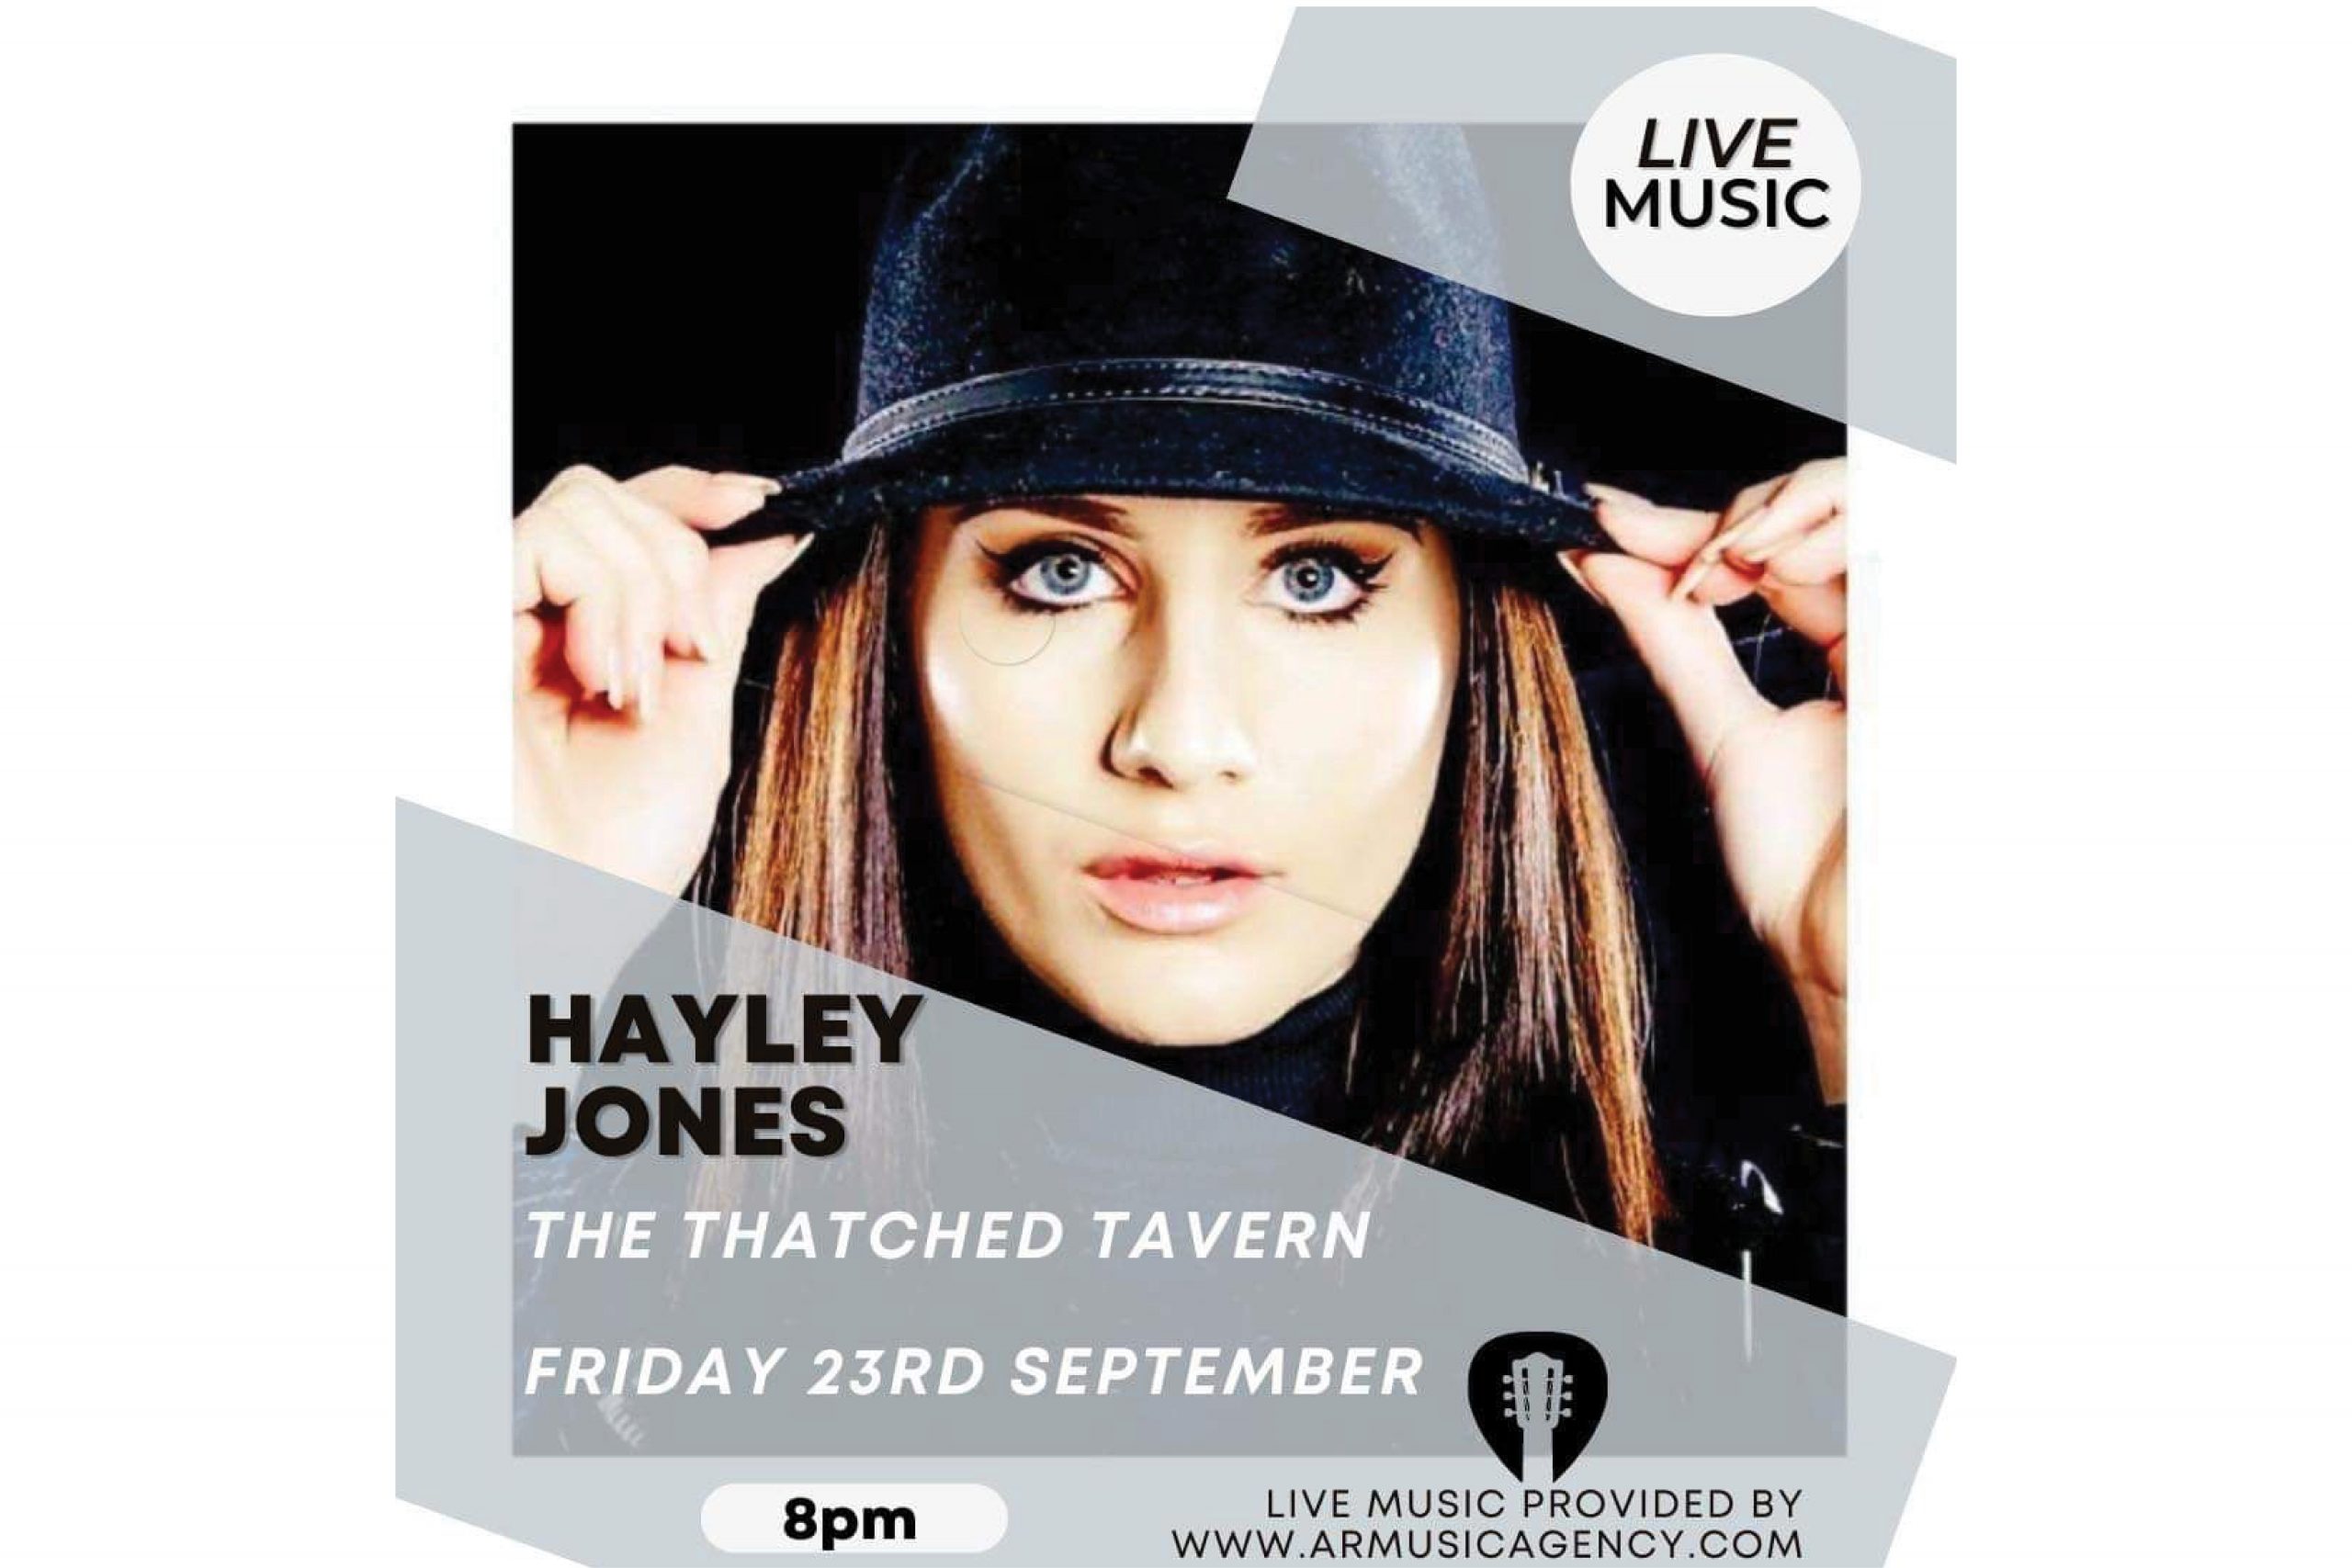 Live music by Hayley Jones at The Thatched Tavern Honeybourne – Friday 23rd September 8.00pm.